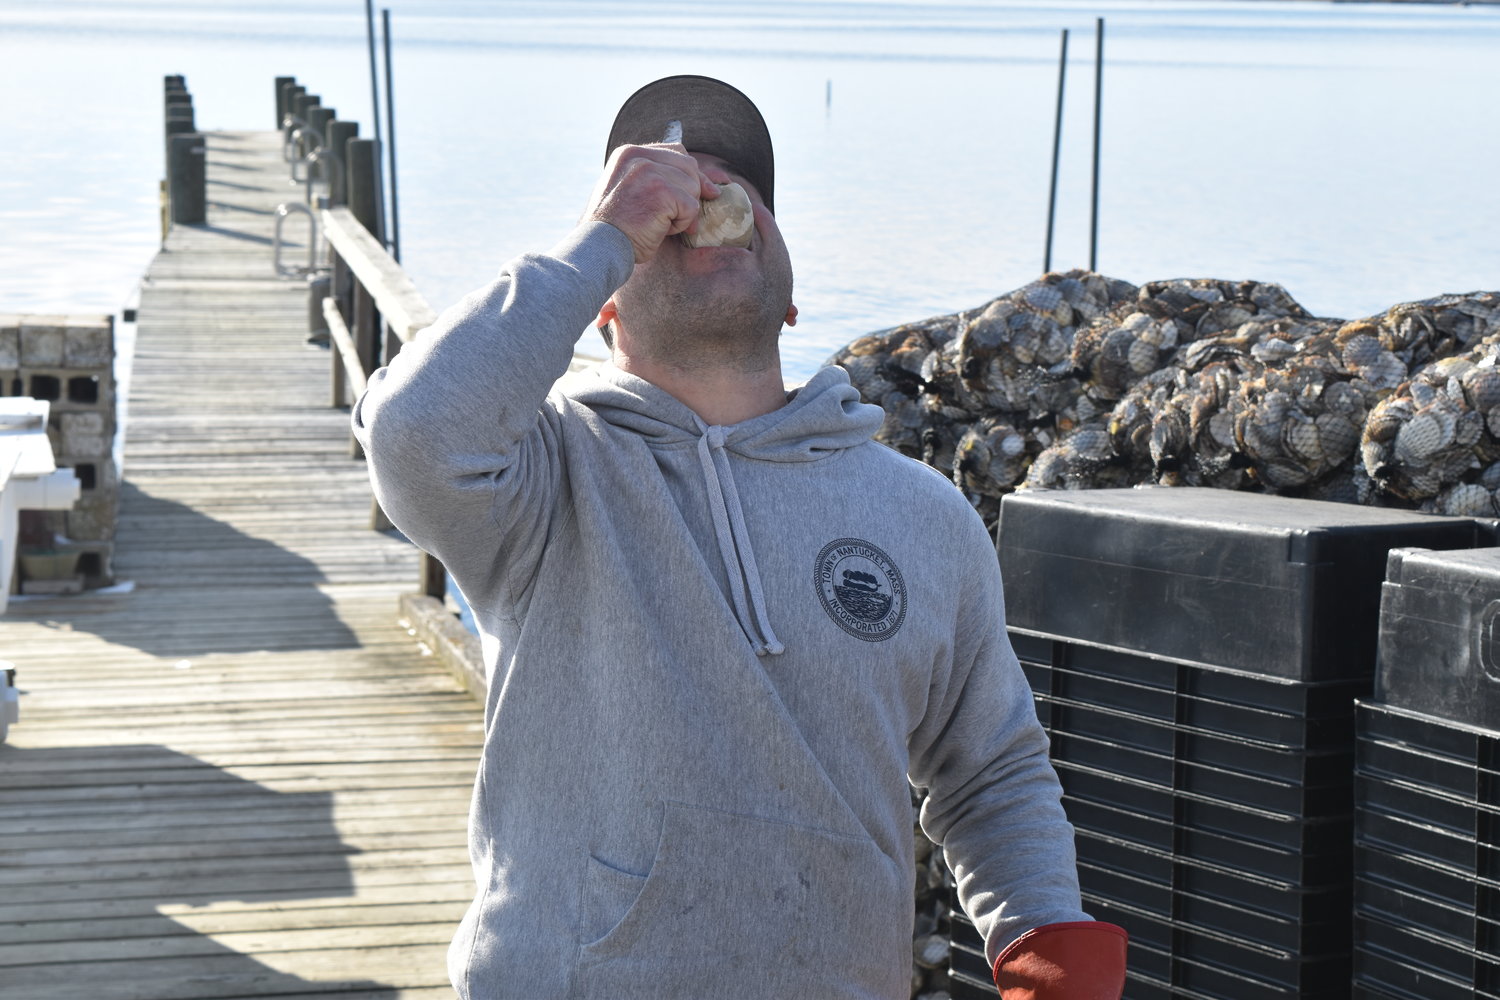 Nantucket shellfish hatchery technician Joe Minella thanks Quentin for his service by swallowing him down after the prediction.